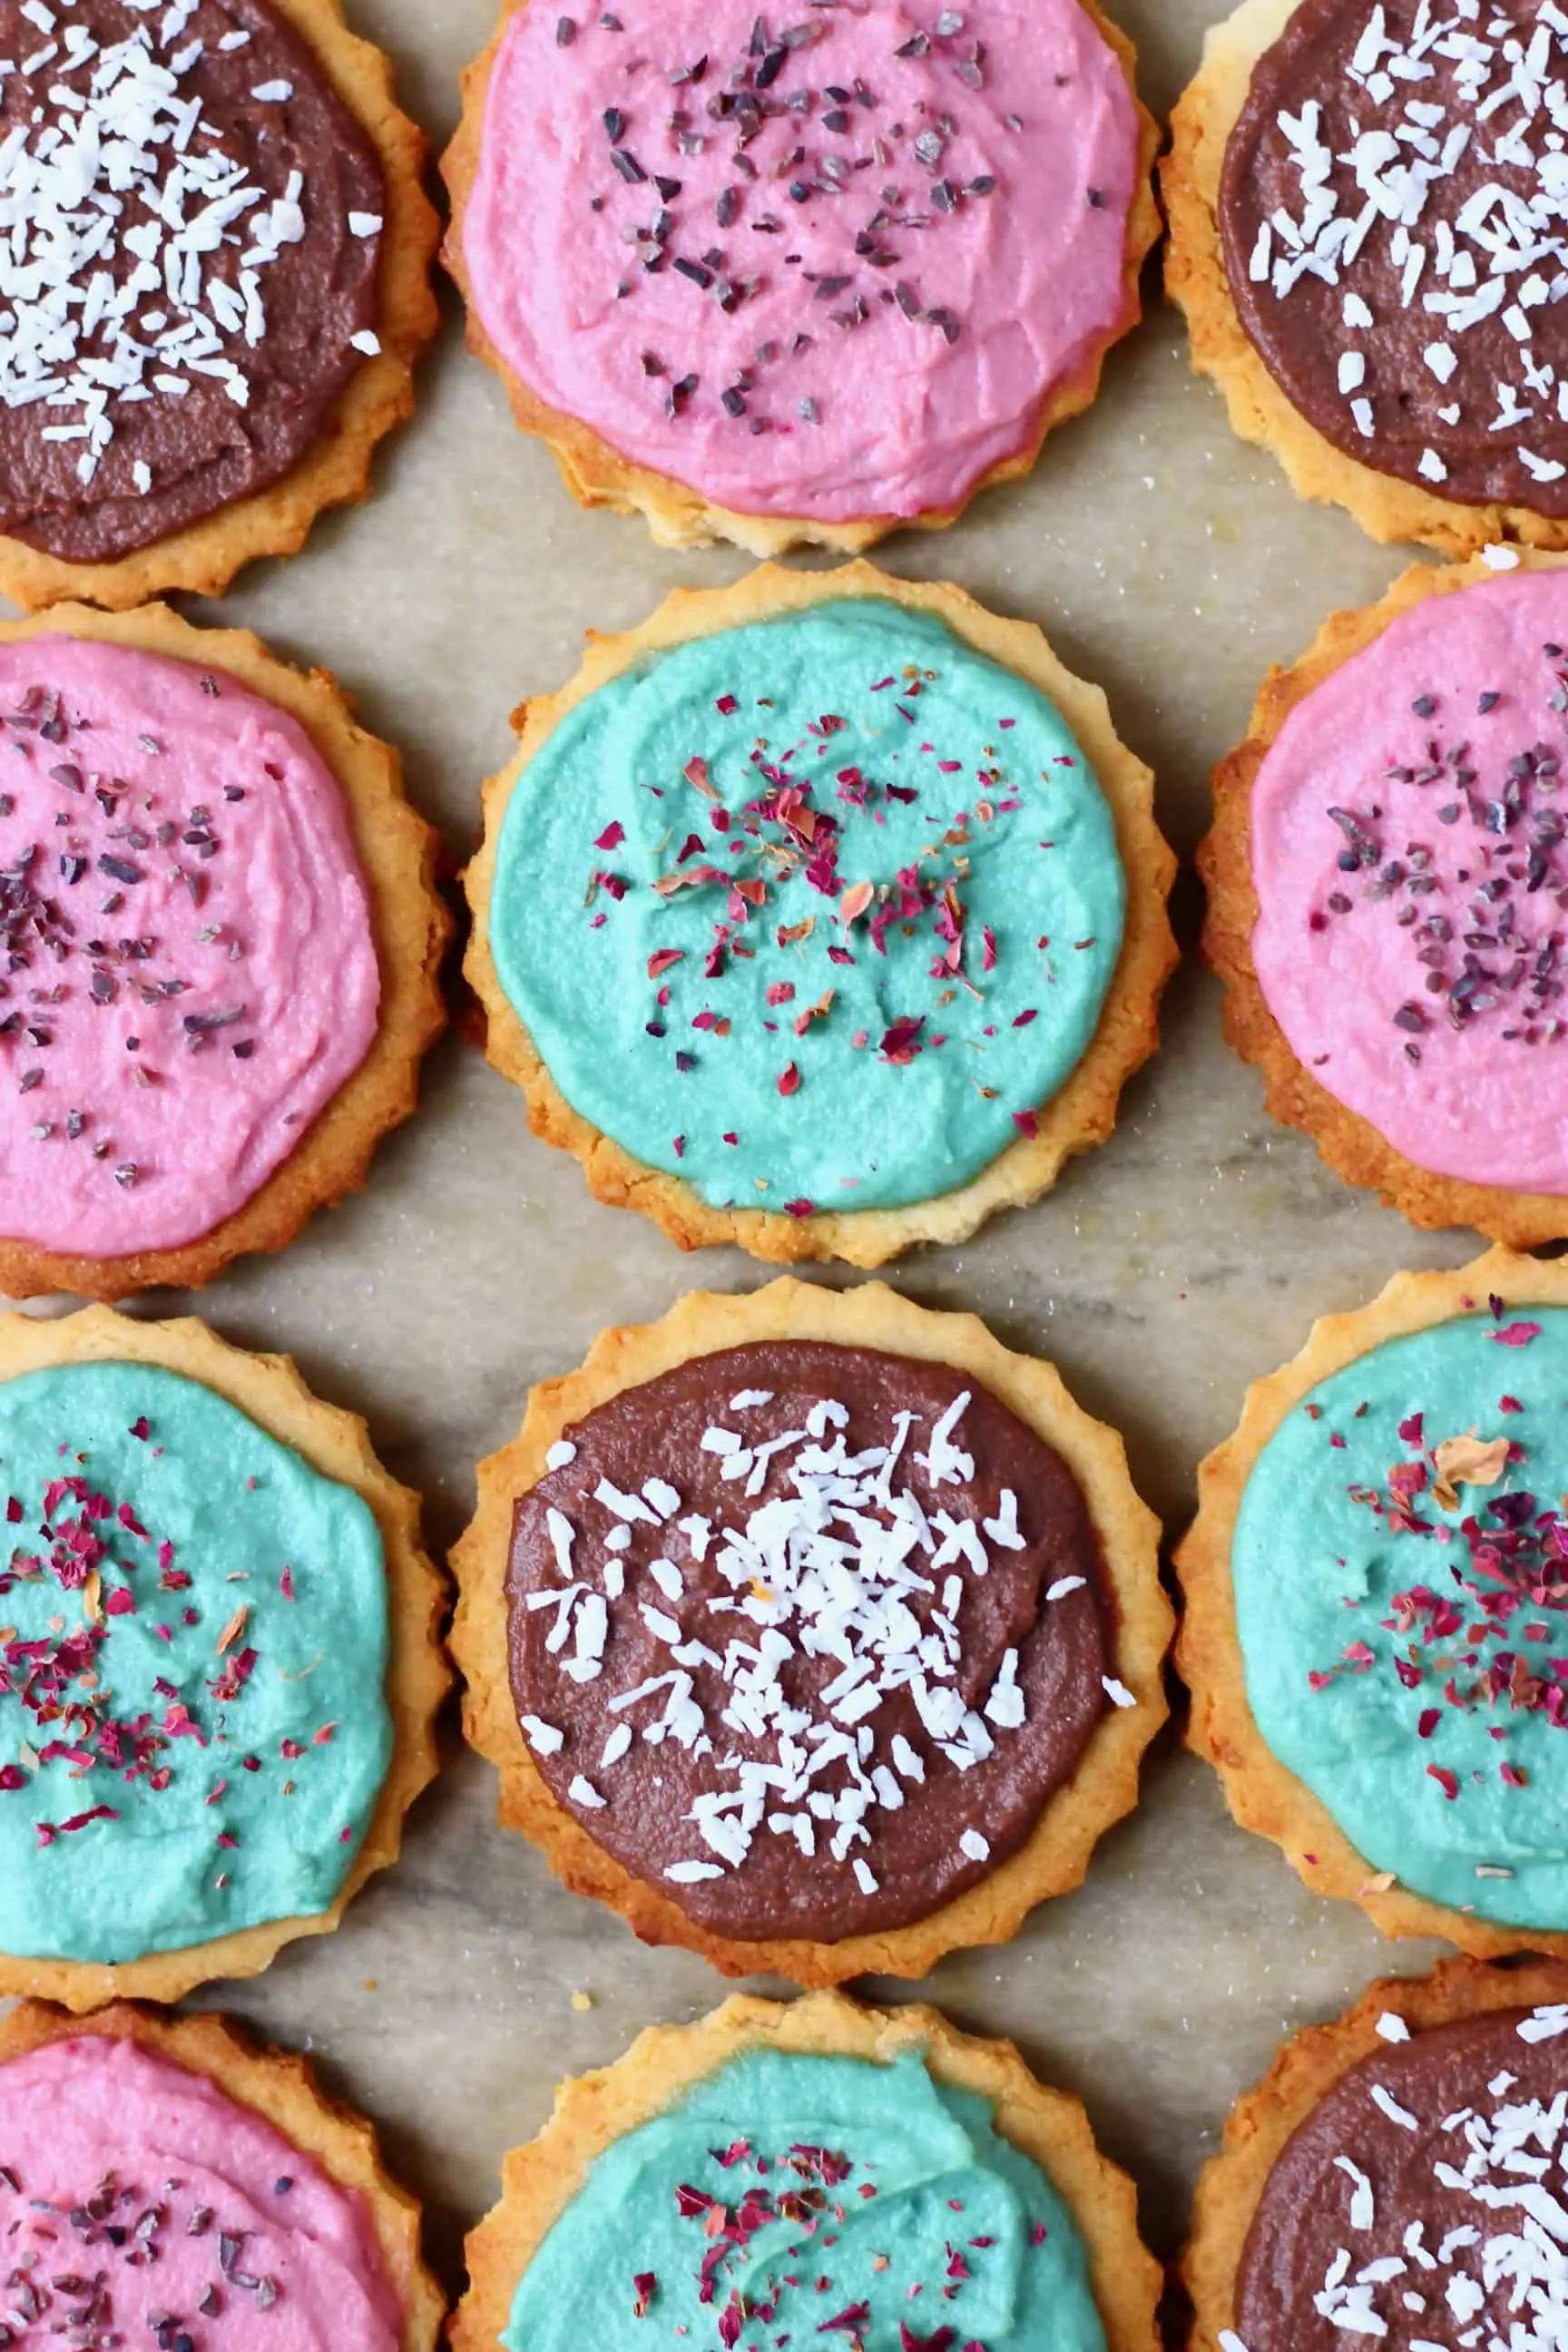 Twelve circular cookies topped with different coloured frosting and sprinkles on a sheet of brown baking paper